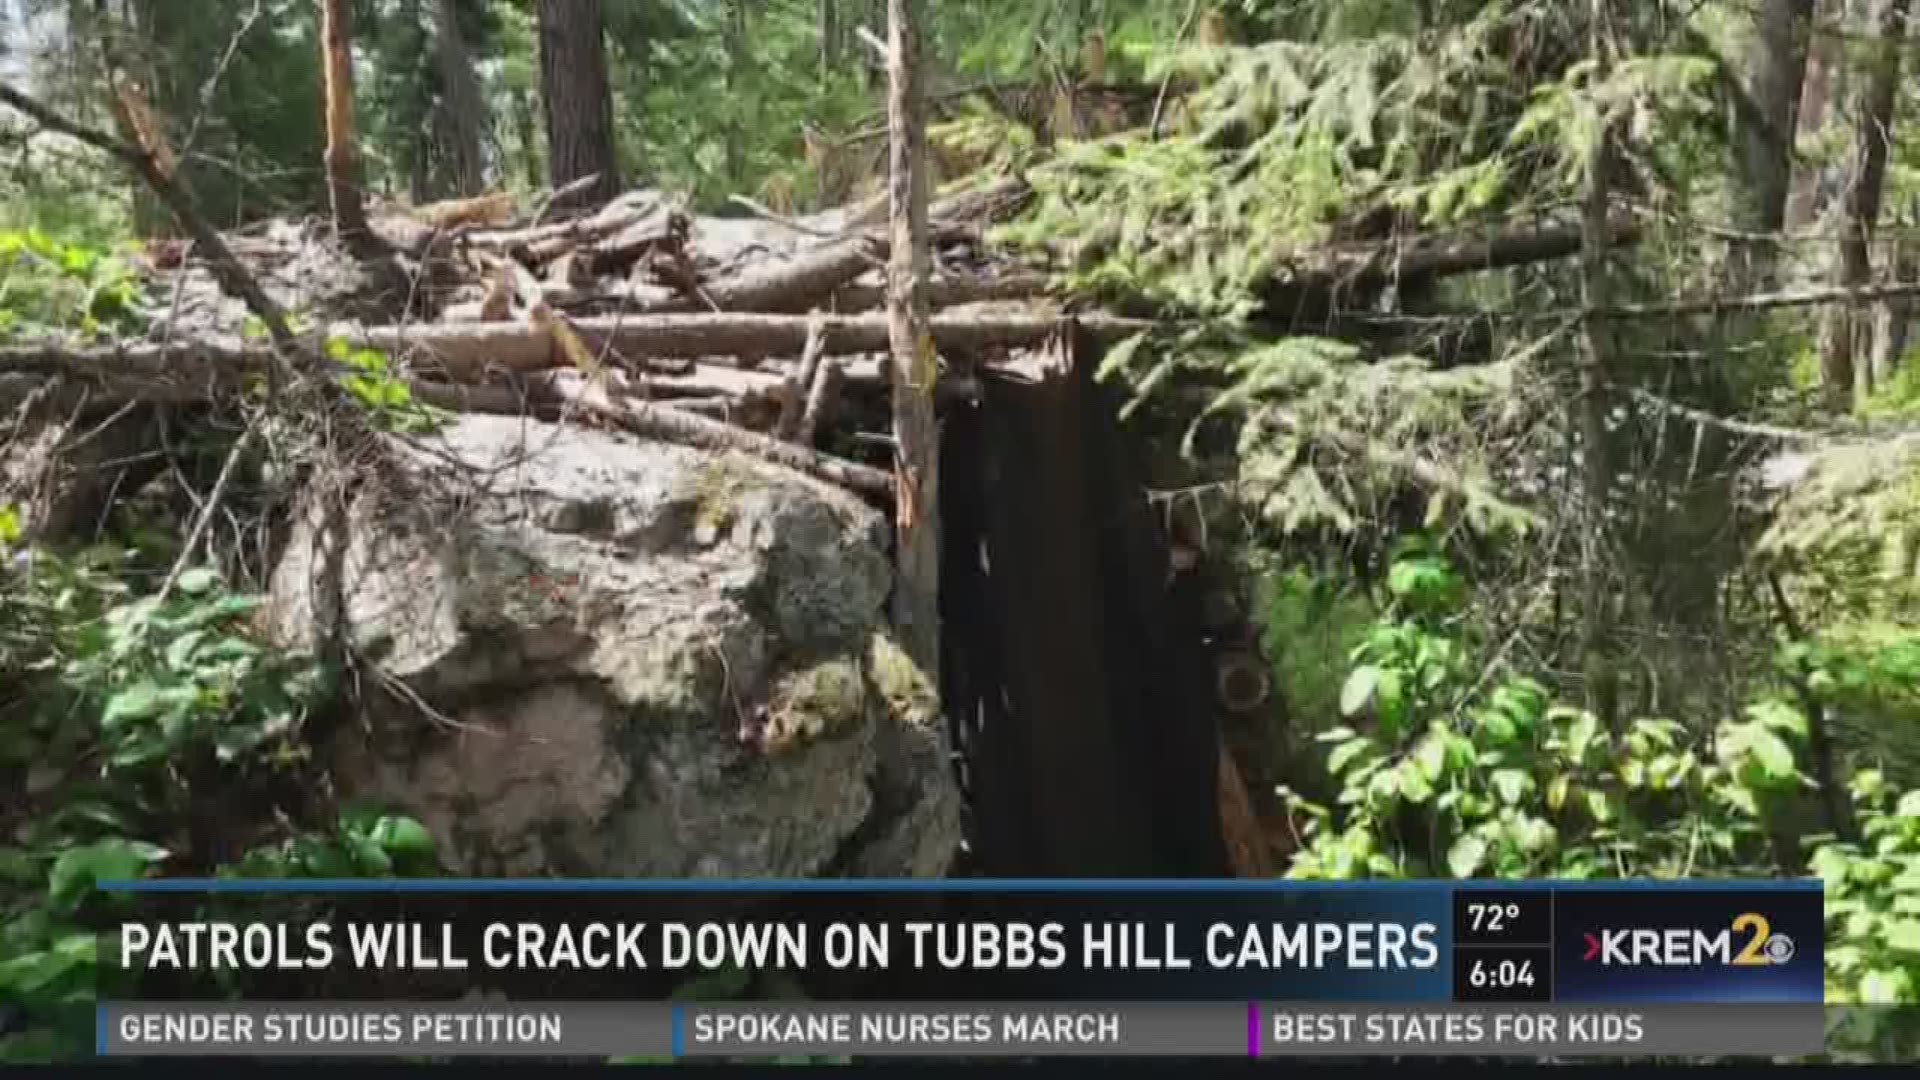 Tubbs Hill is known for hiking, camping --- and as of last summer, man made fires.